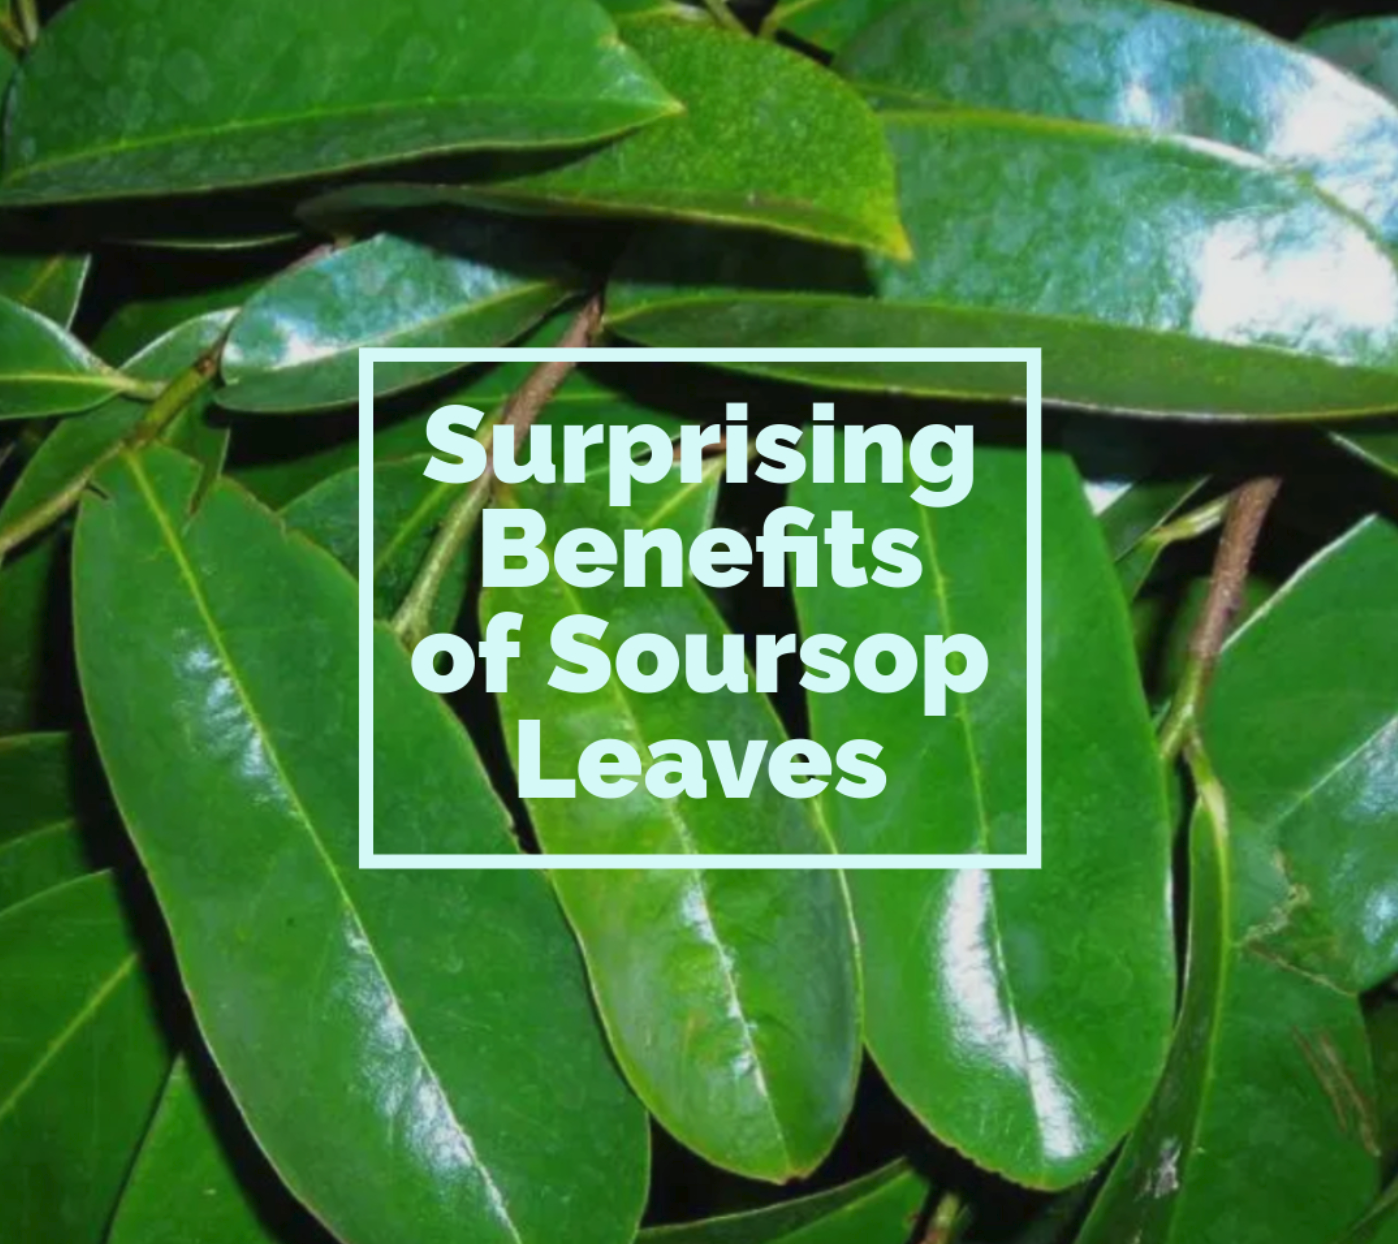 The Benefits of Soursop Tea Made in Puna